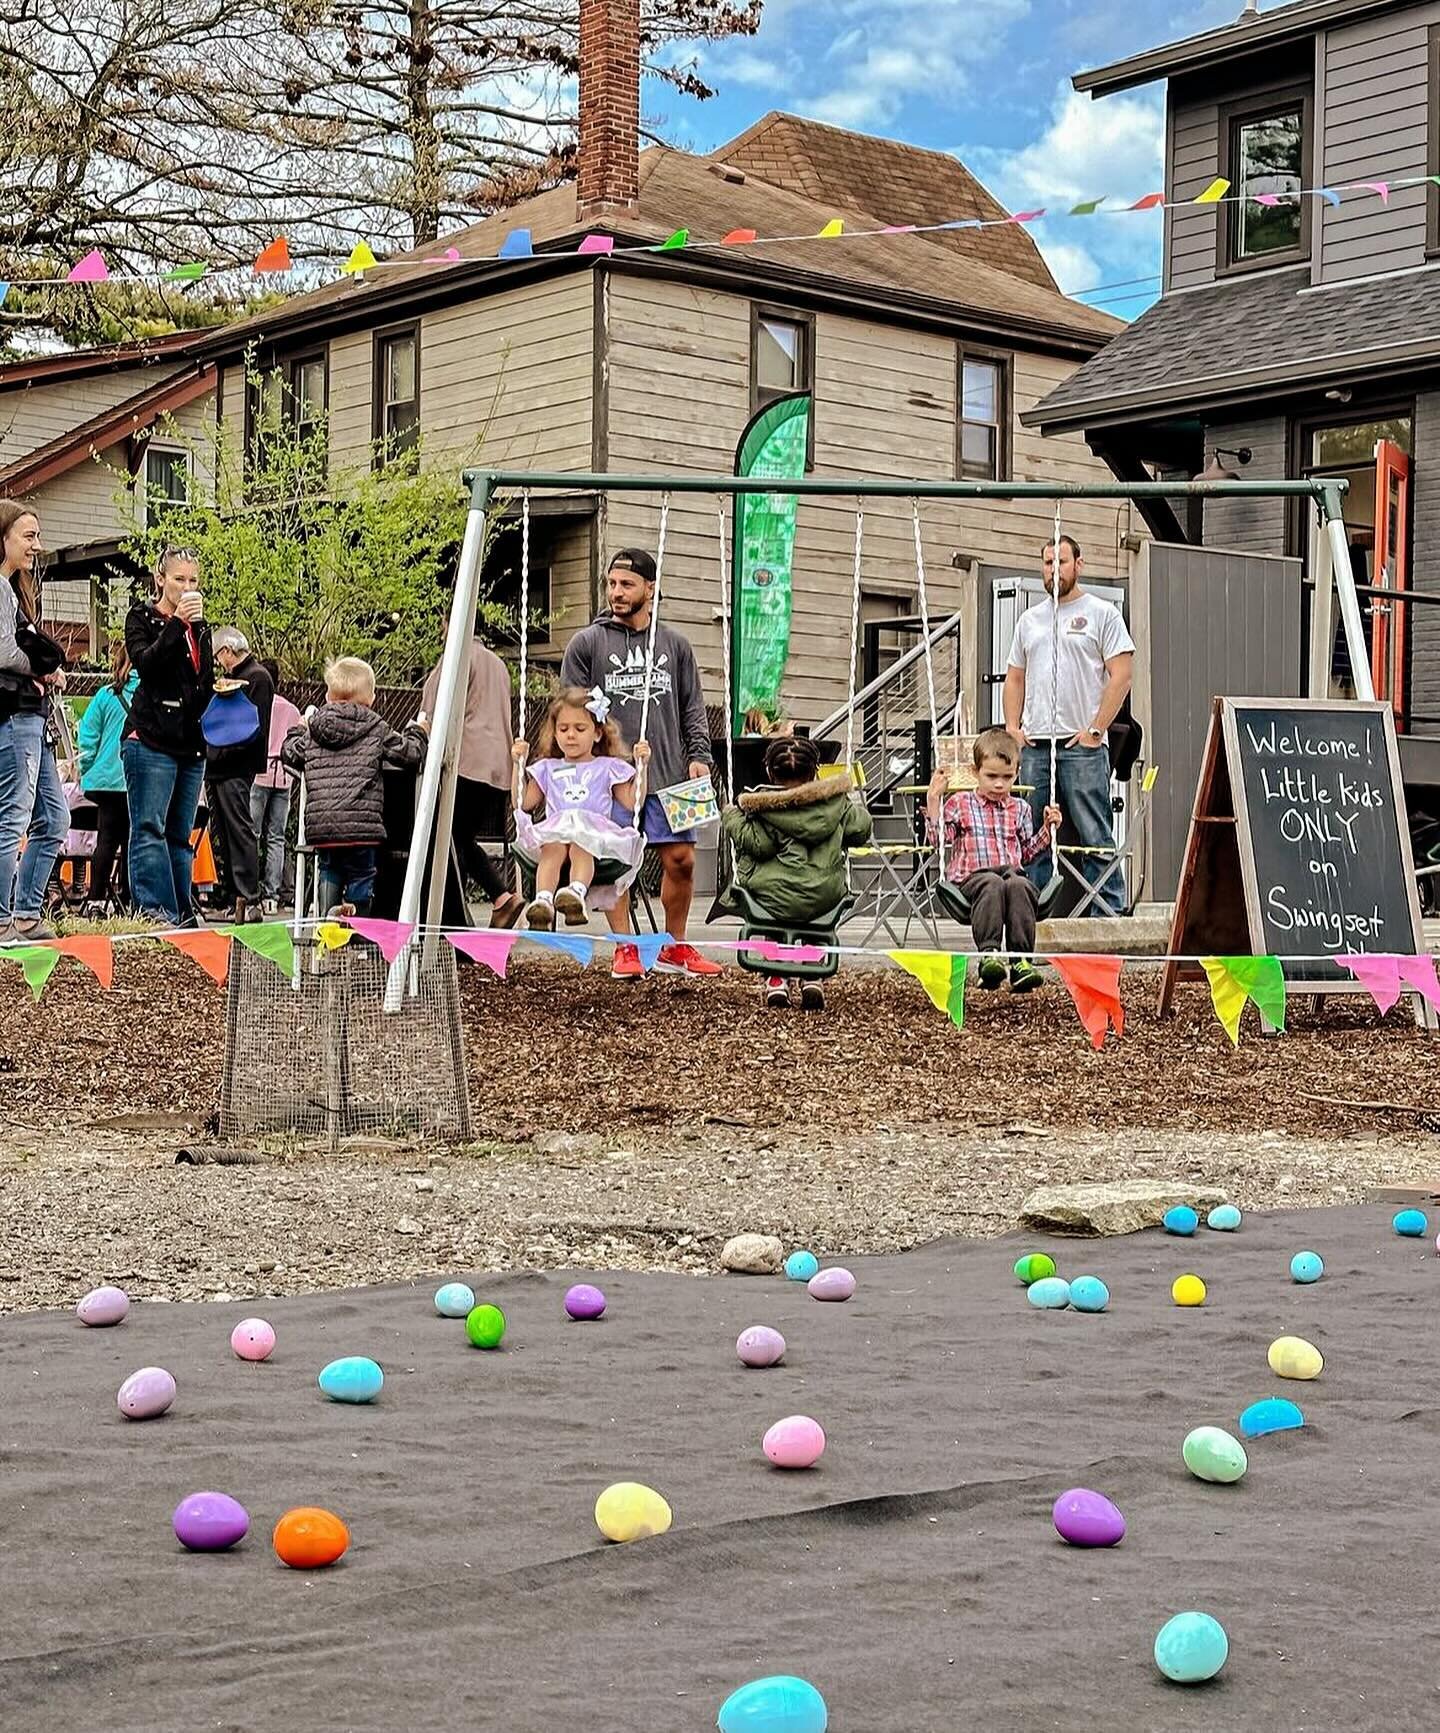 What a day! We welcomed about 150 neighbors to the 3rd annual @communityhappenshere Egg Hunt! This year @weimaginecincinnati was proud to host the 0-4 year old egg hunt and play area. We love creating spaces for families with littles to connect, rela